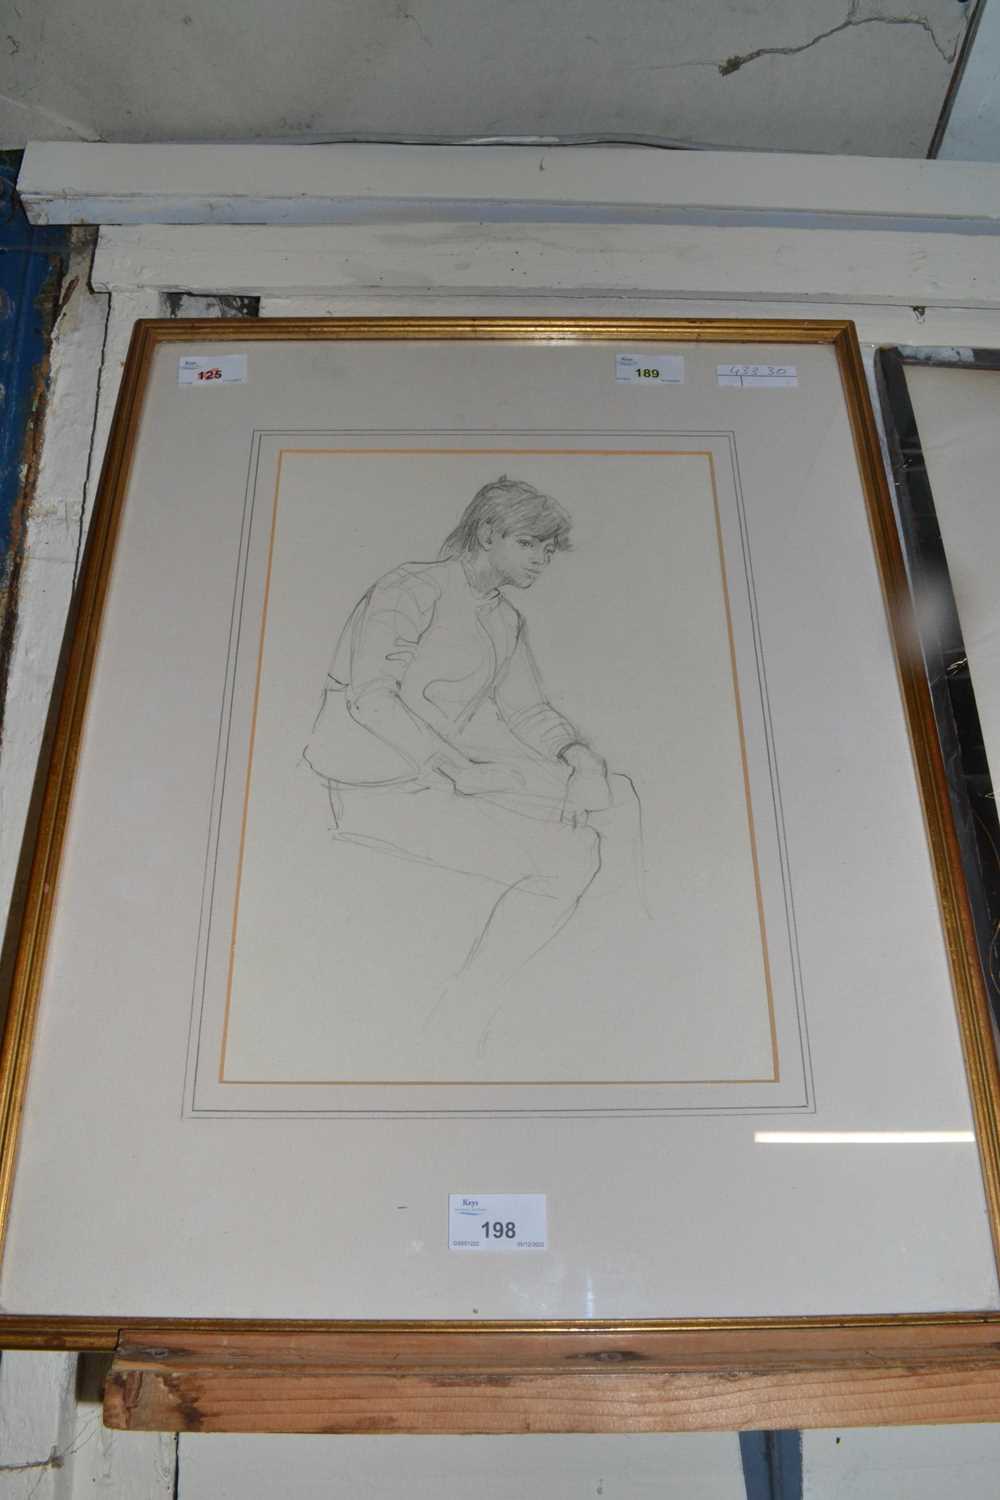 British School (20th century), a study of a seated boy, pencil sketch, 9x13ins, framed and glazed. - Image 2 of 2